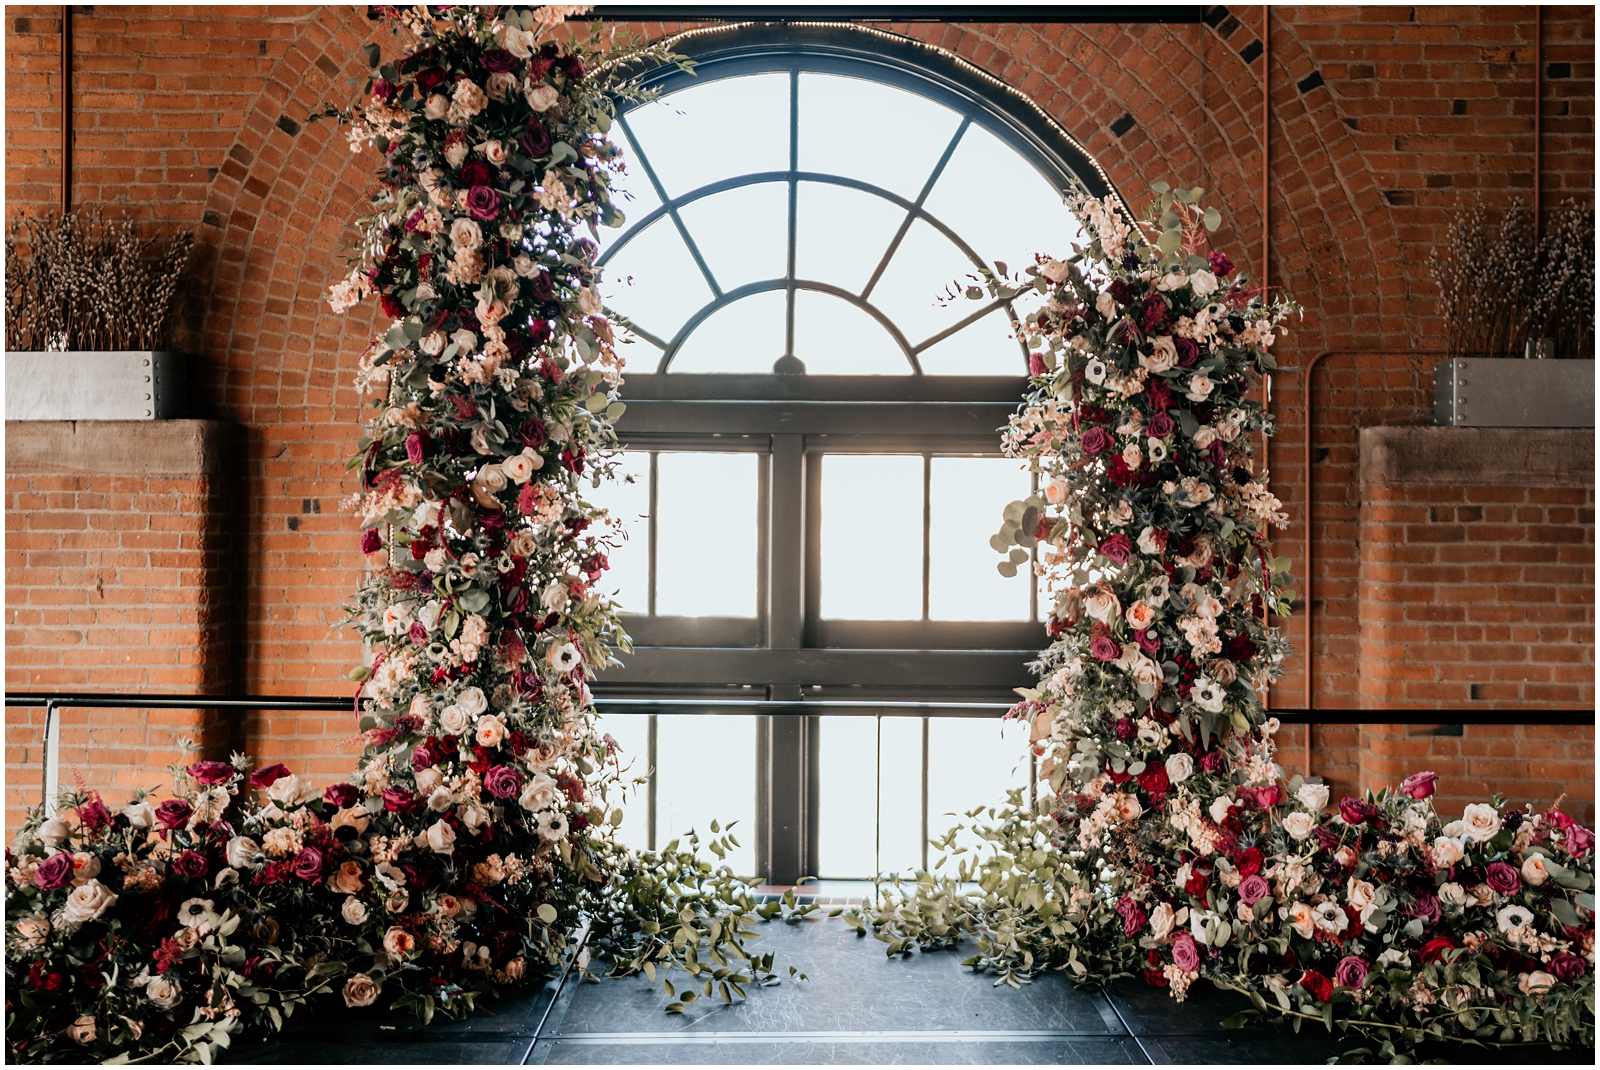 Windows on the River Cleveland wedding ceremony